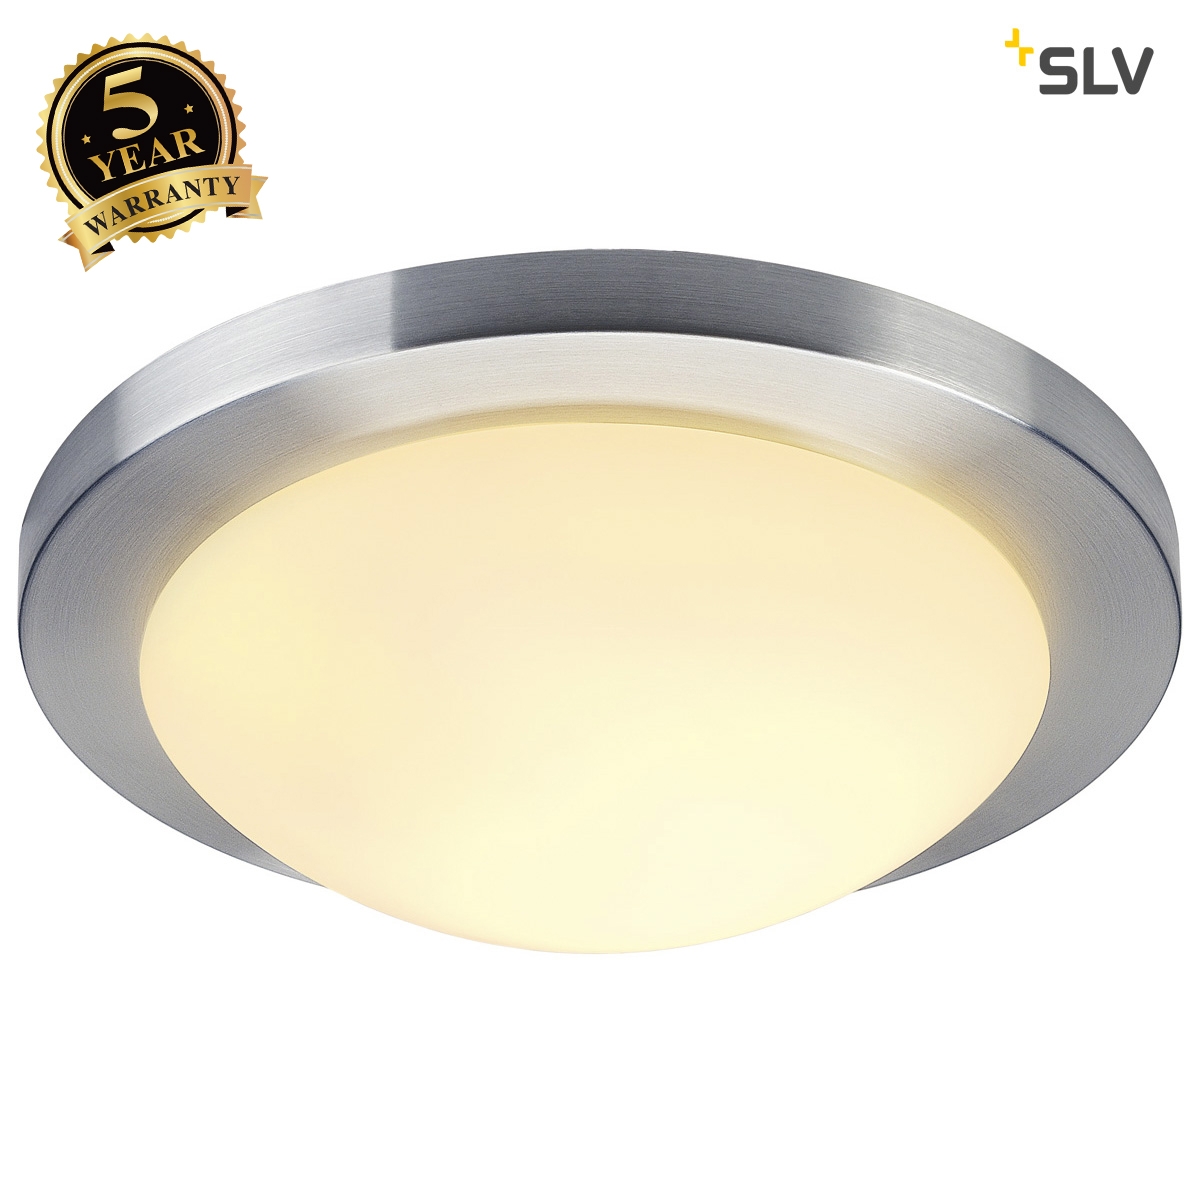 SLV MELAN ceiling light, round, alu brushed, frosted glass, E27, max. 60W 155236